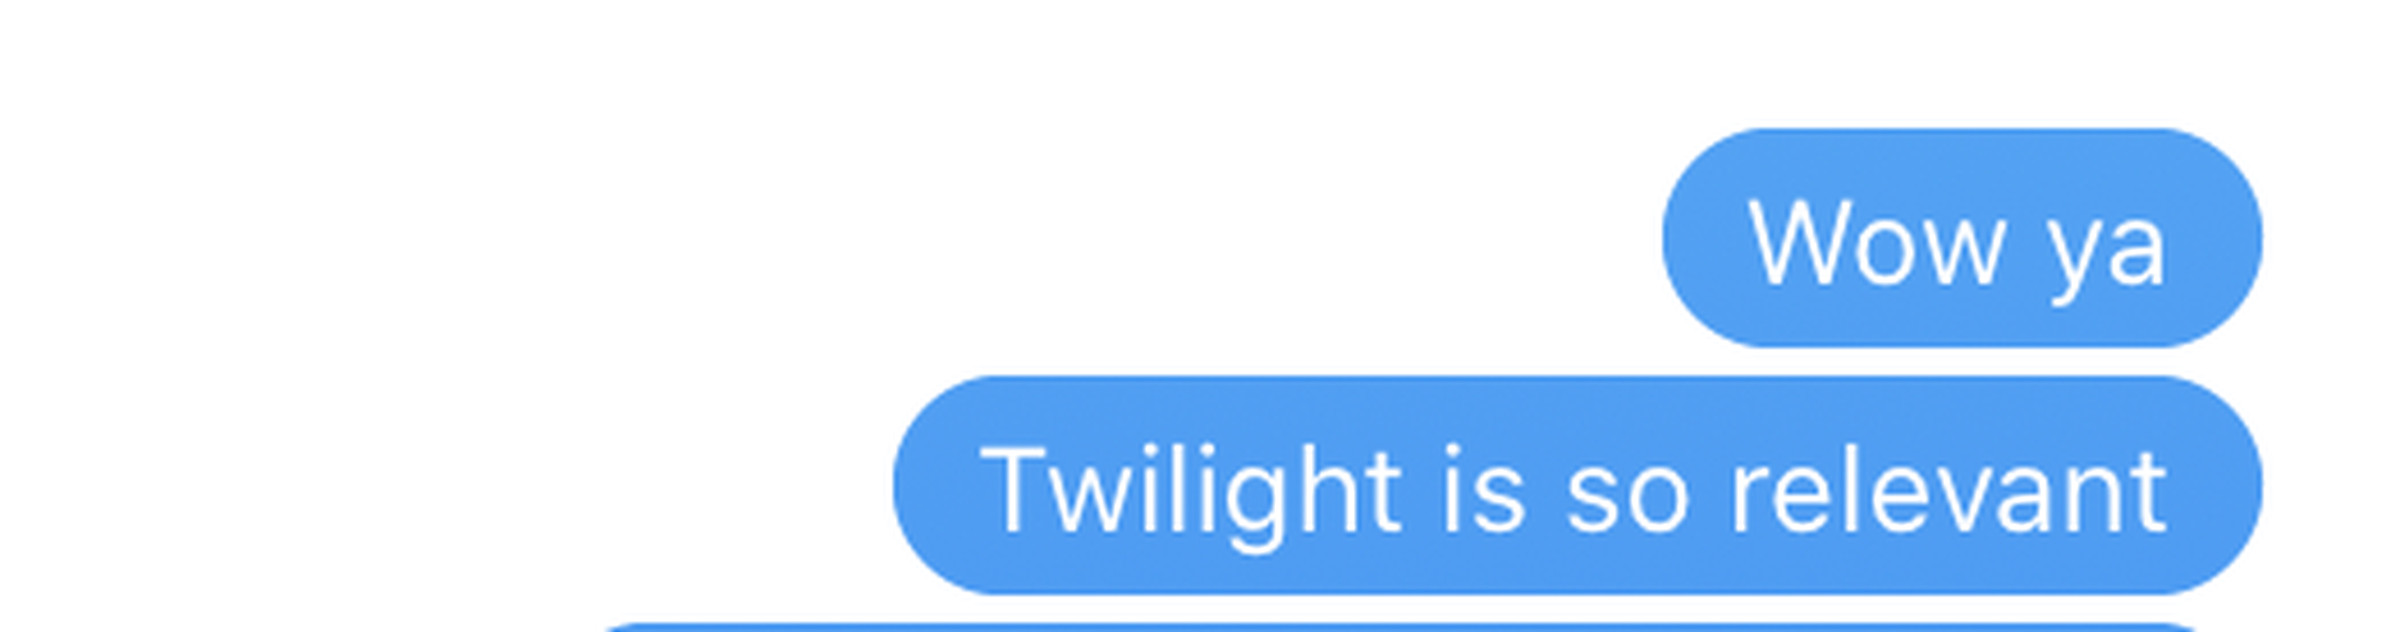 Text message reading: Wow ya. Twilight is so relevant